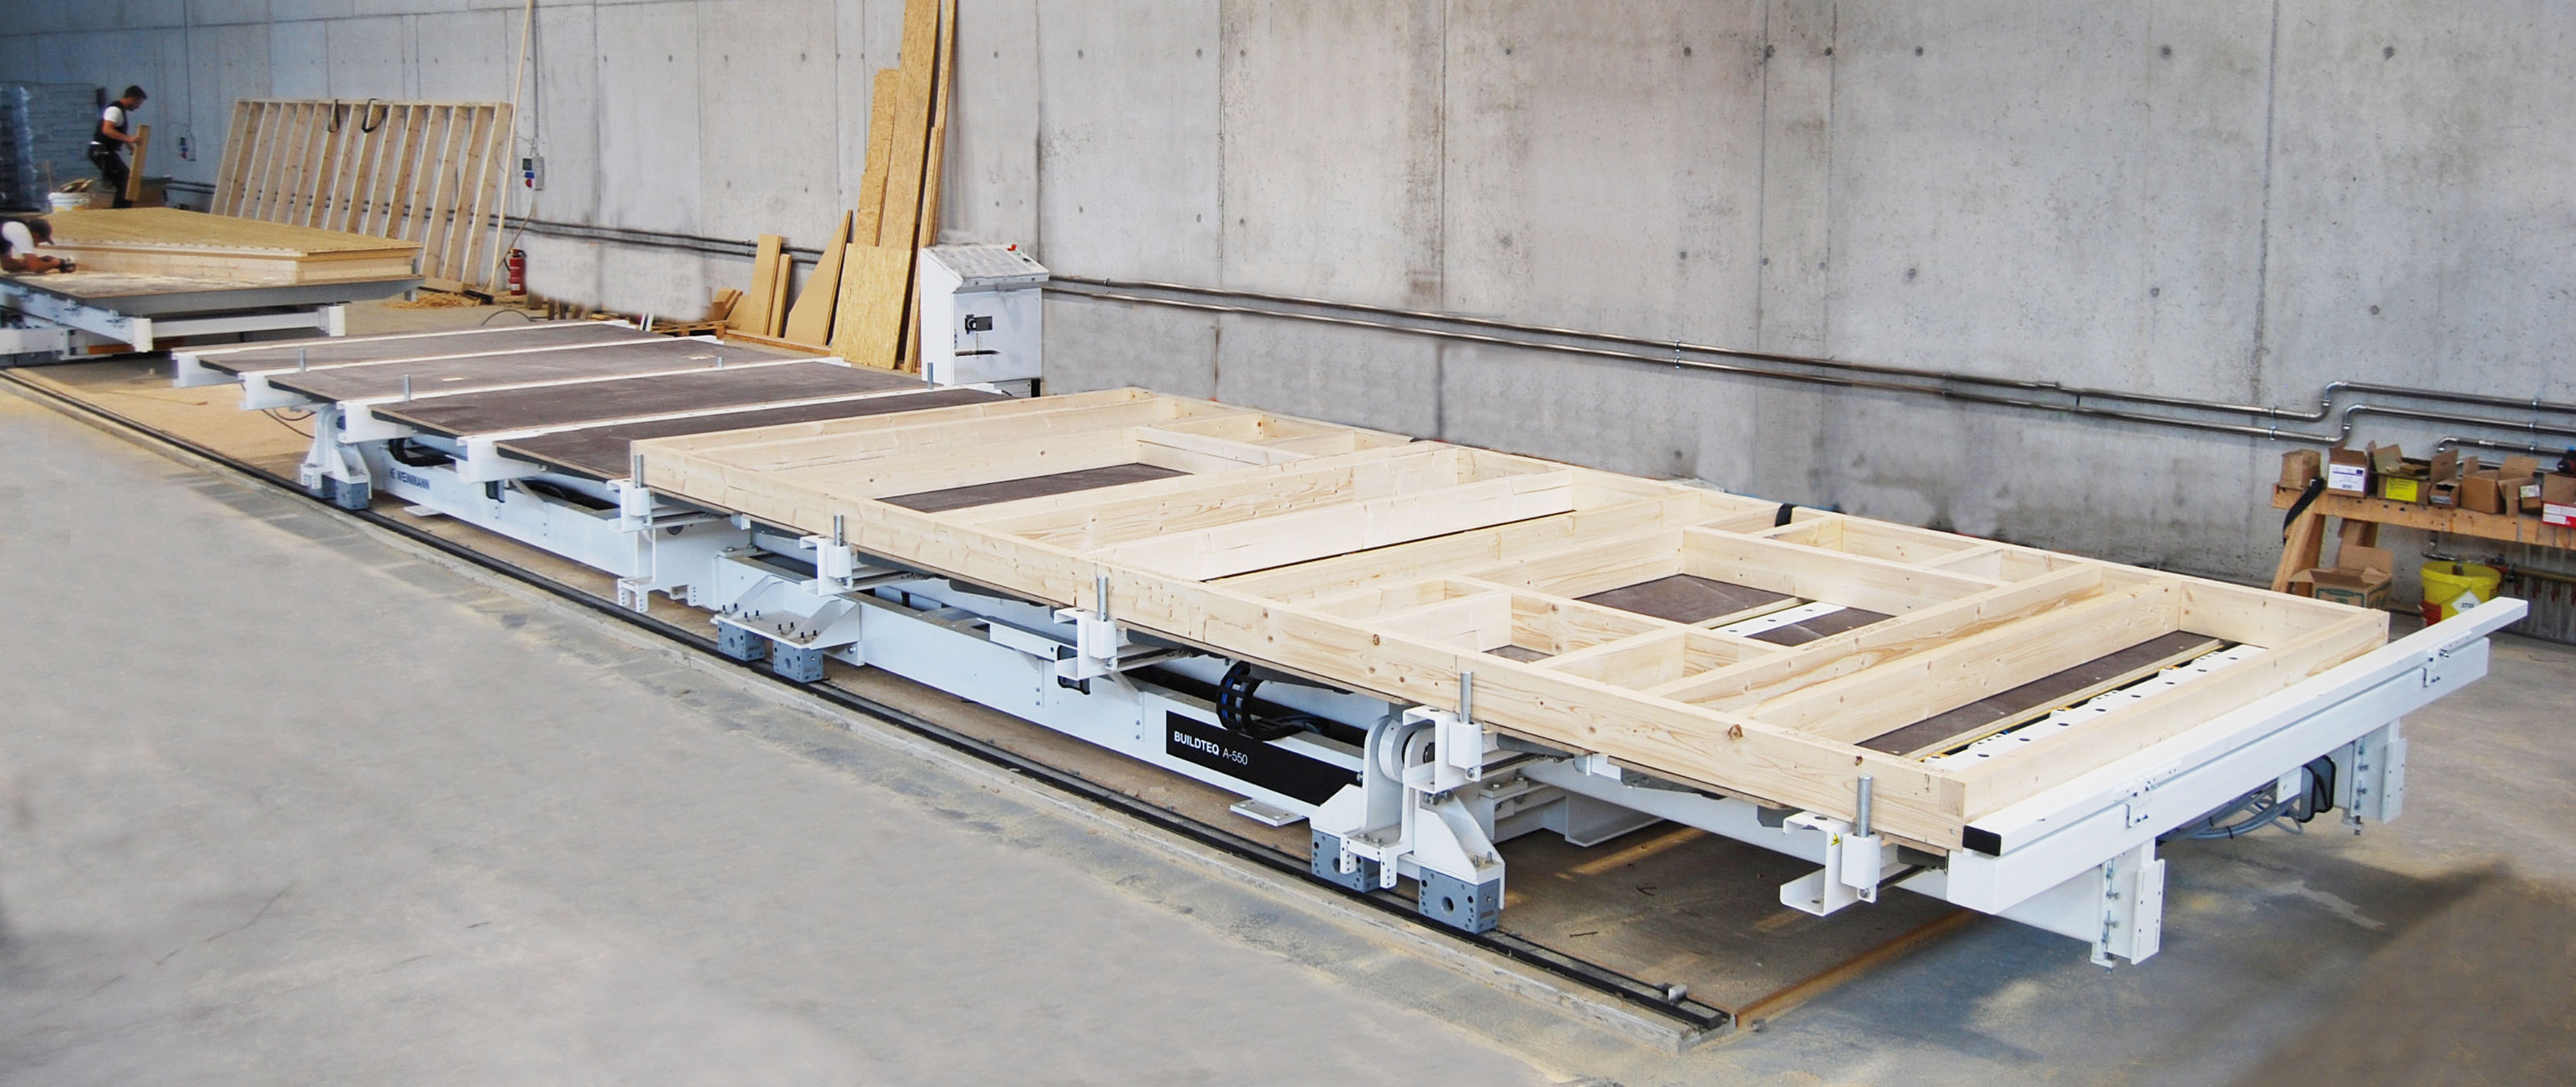 WEINMANN carpentry table BUILDTEQ for timber frame construction